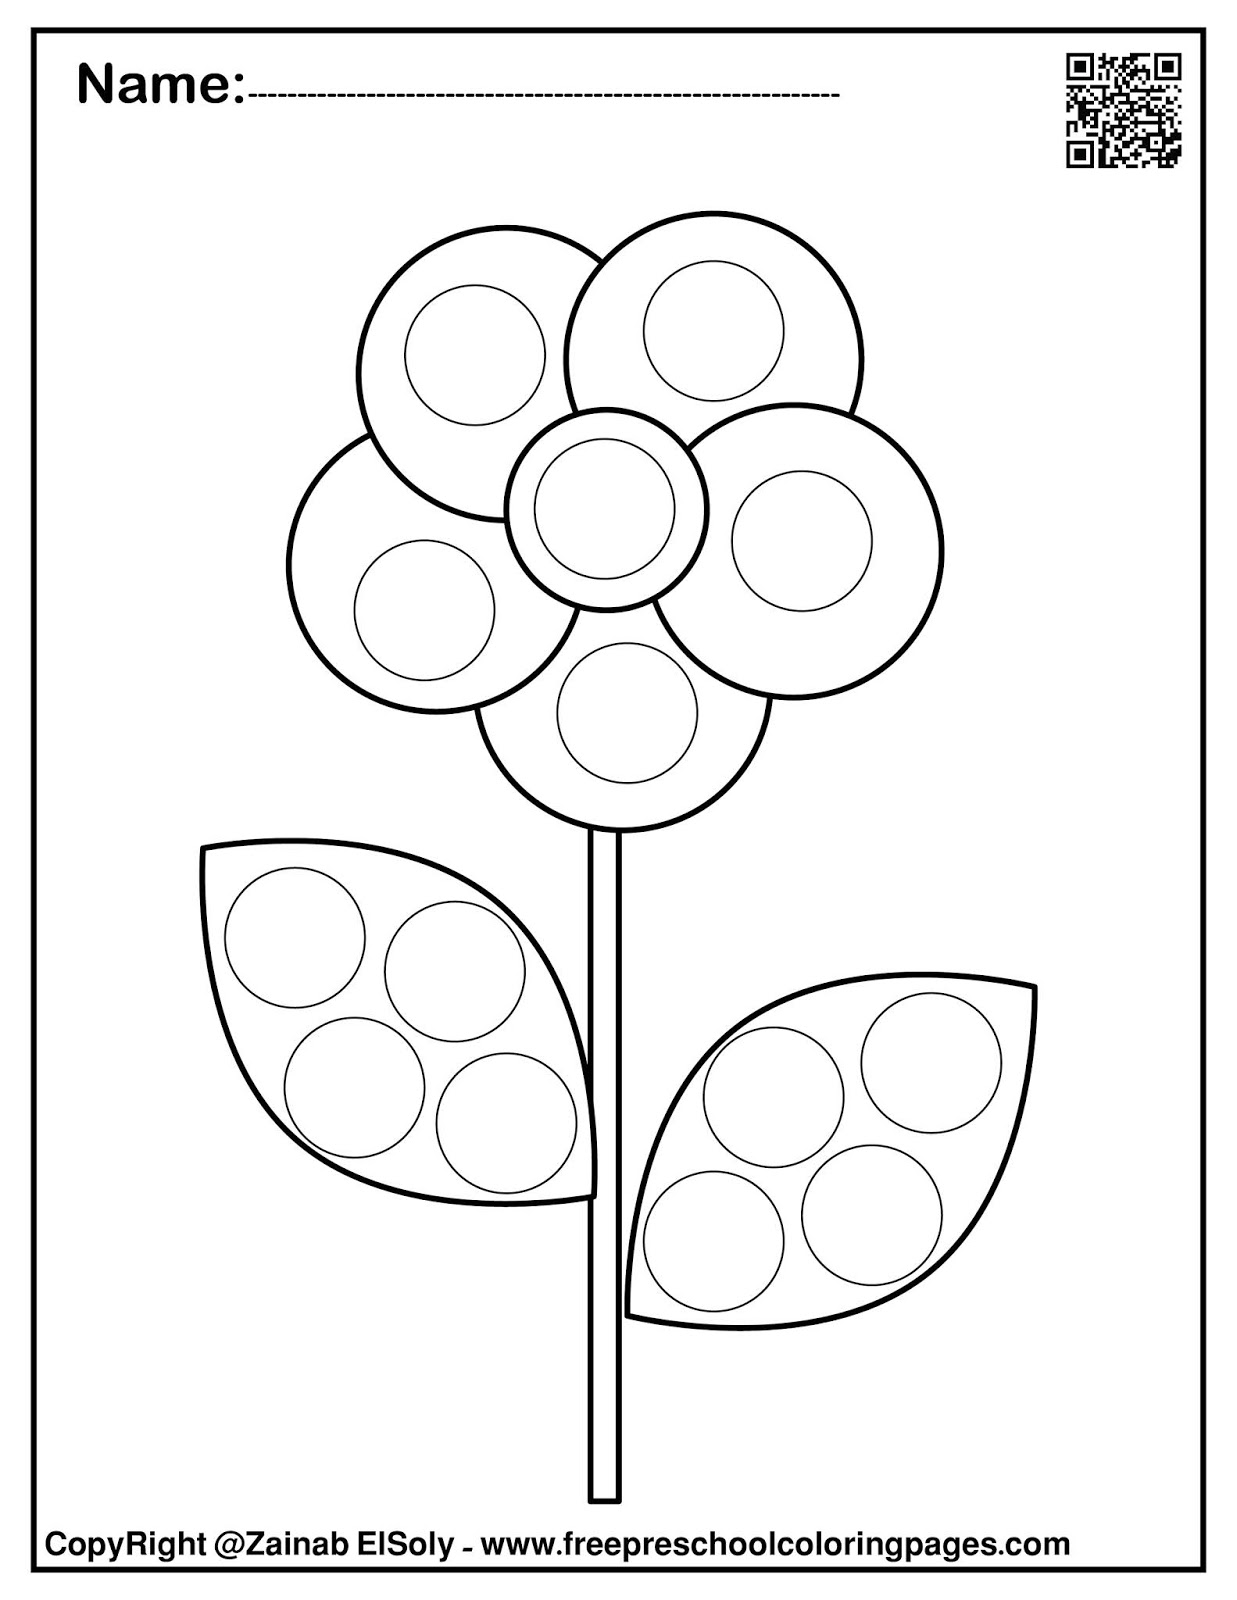 Download Set of Spring Dot Marker Free coloring pages